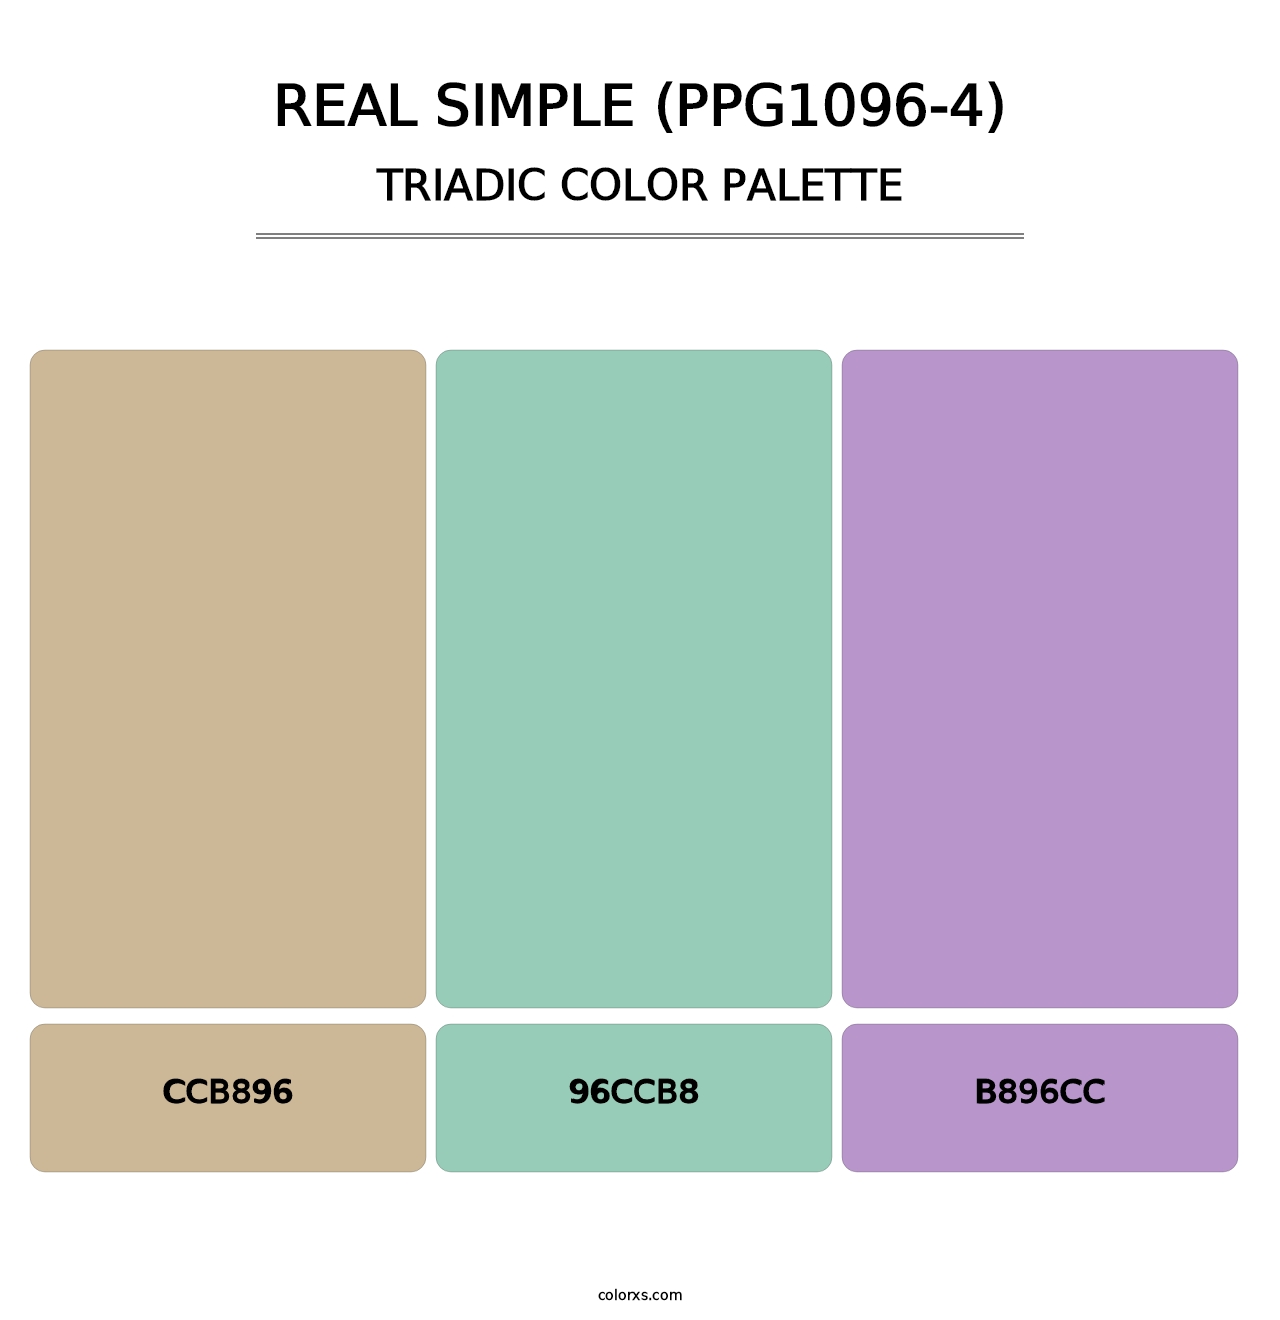 Real Simple (PPG1096-4) - Triadic Color Palette